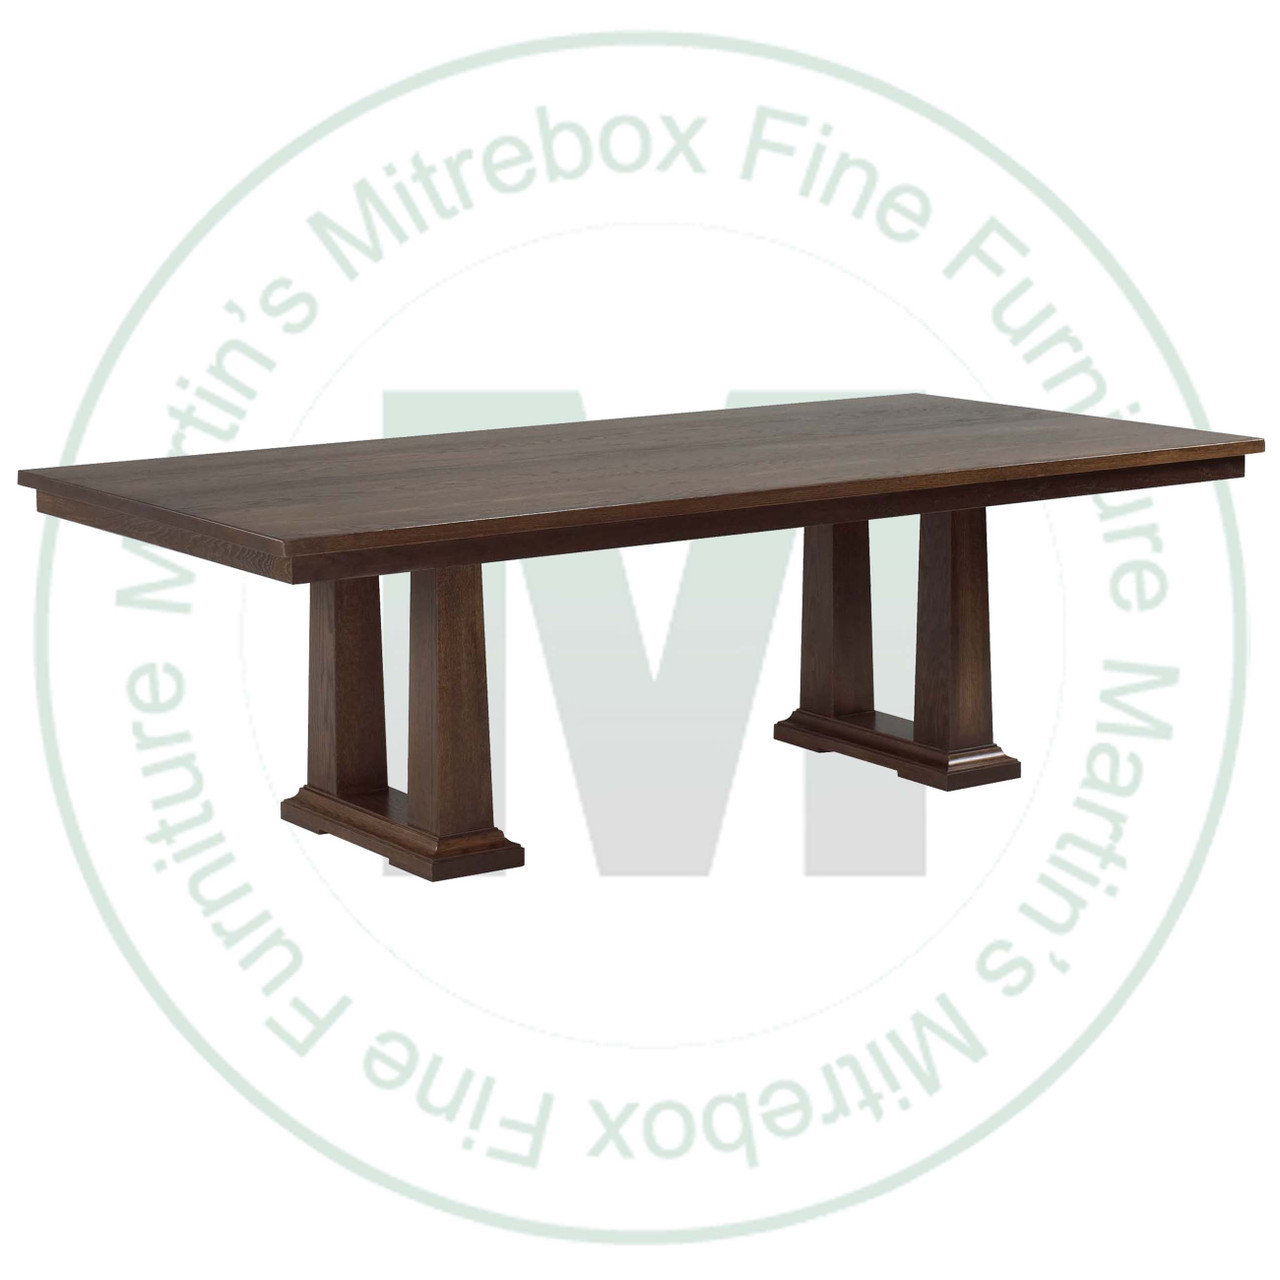 Oak Acropolis Solid Top Double Pedestal Table 54''D x 120''W x 30''H Table Has 1.75'' Thick Top And 2 - 16'' Extensions